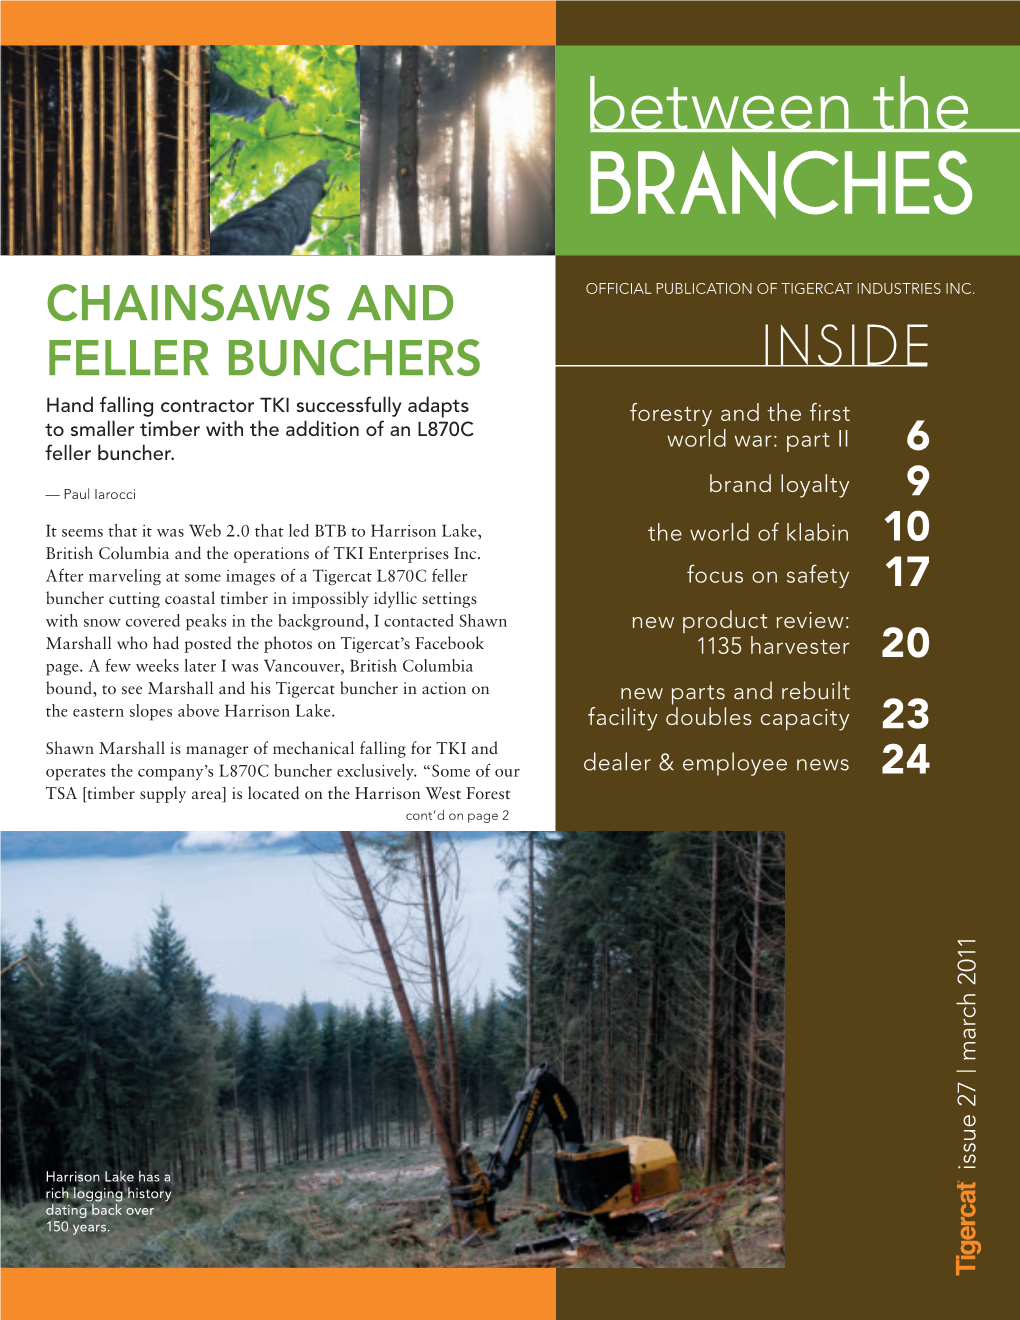 Issue 27, Between the Branches, March 2011